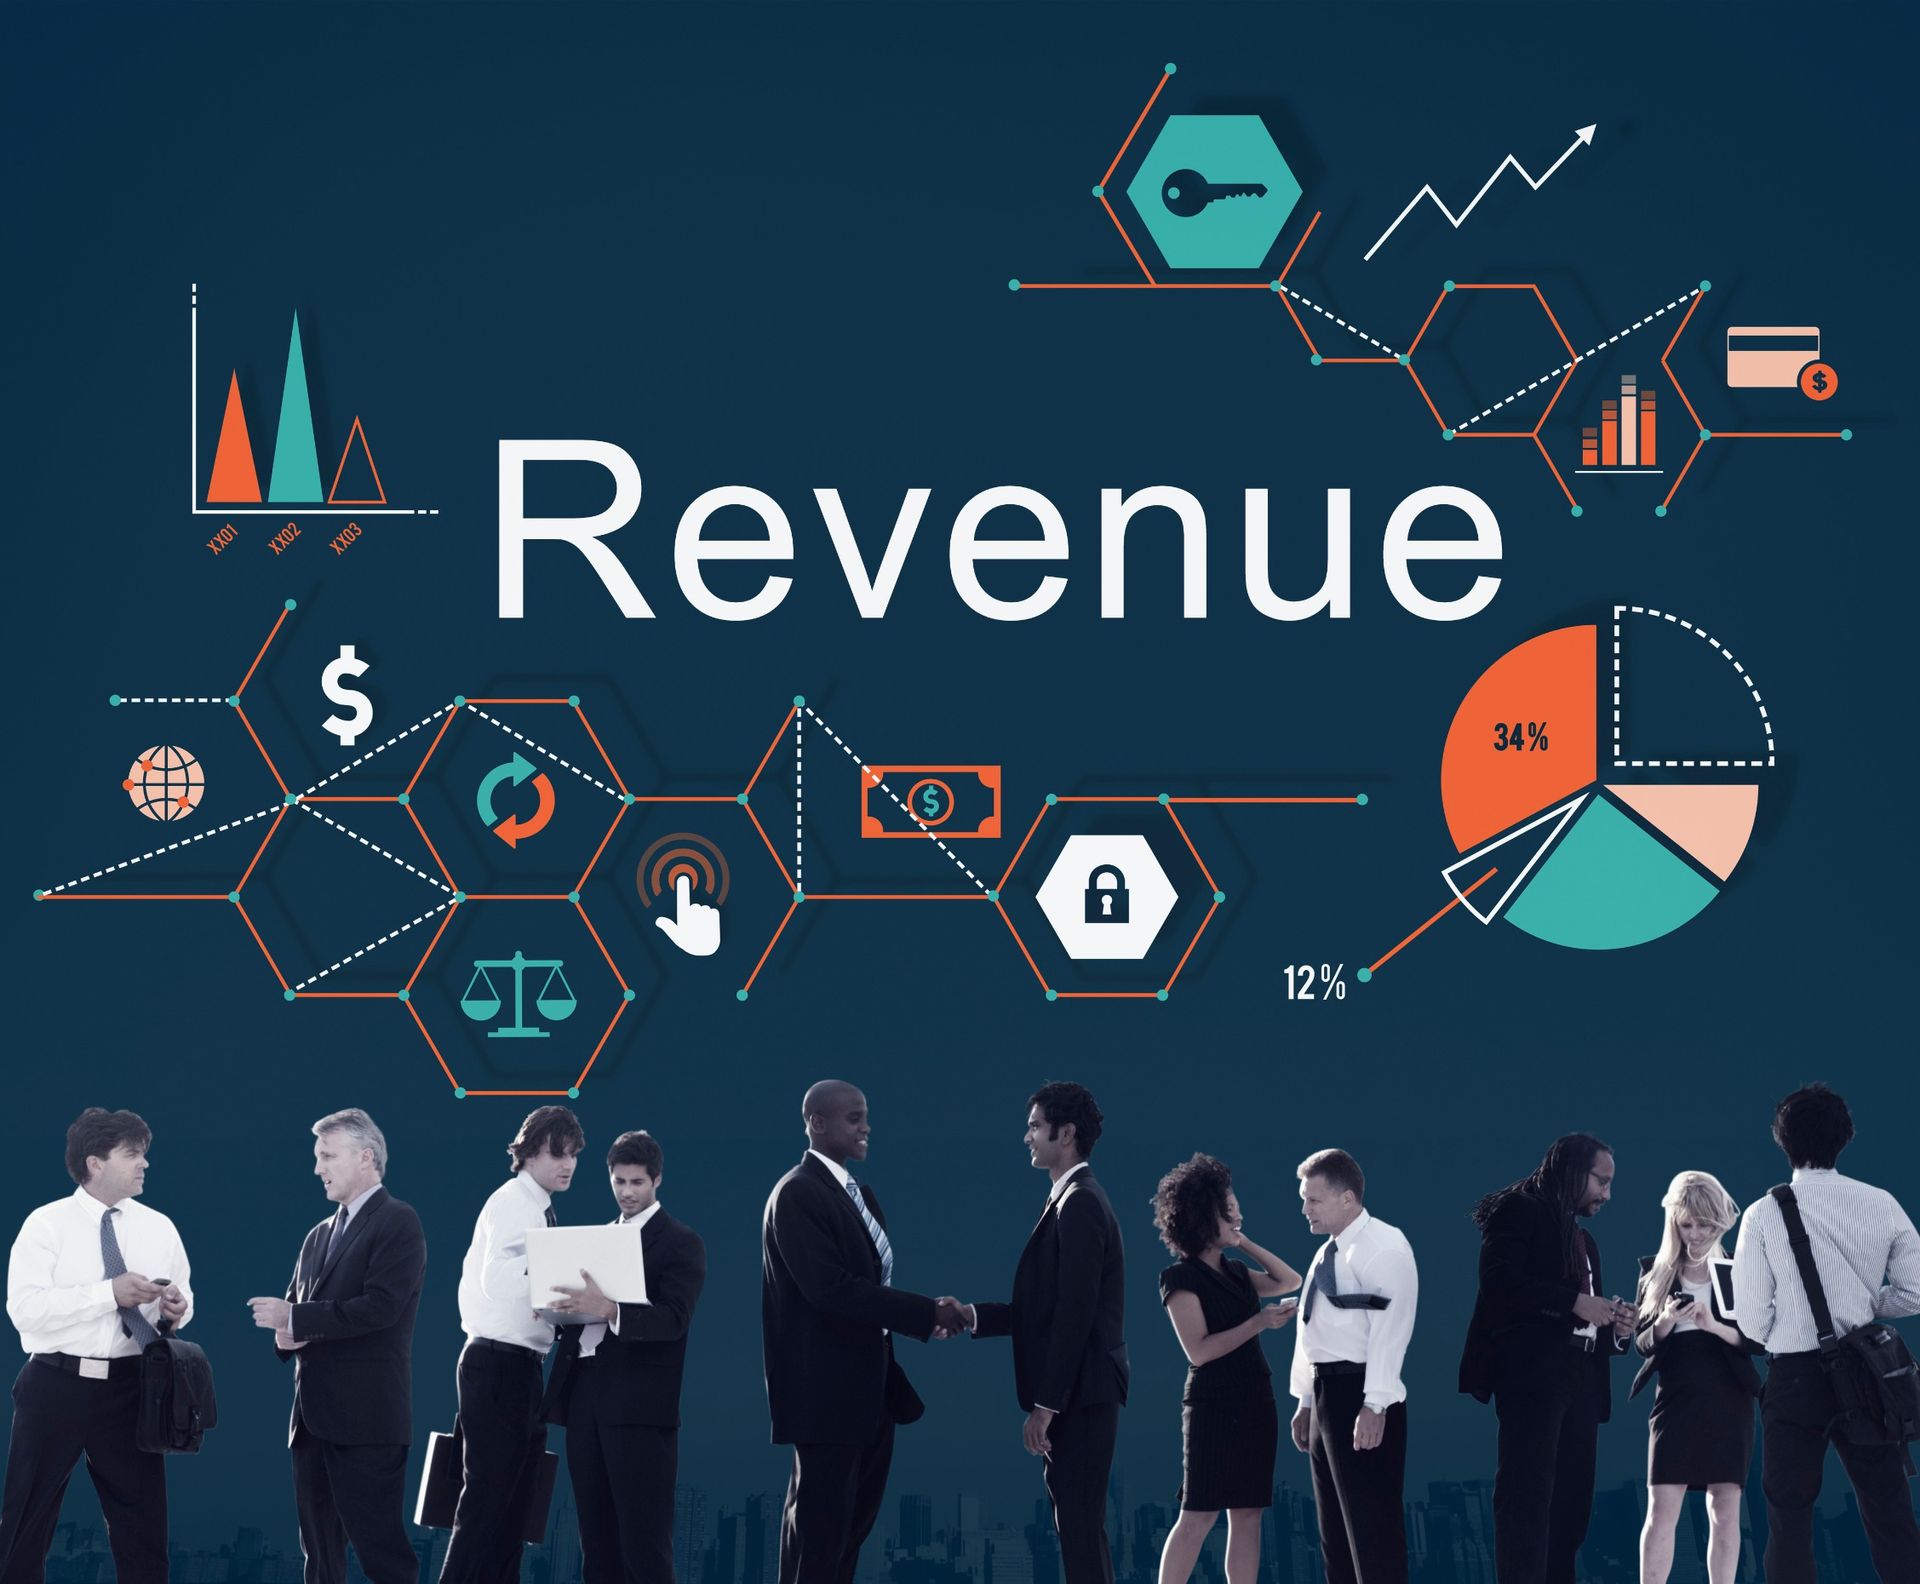 Revenue Engineering graphic showing different elements of it